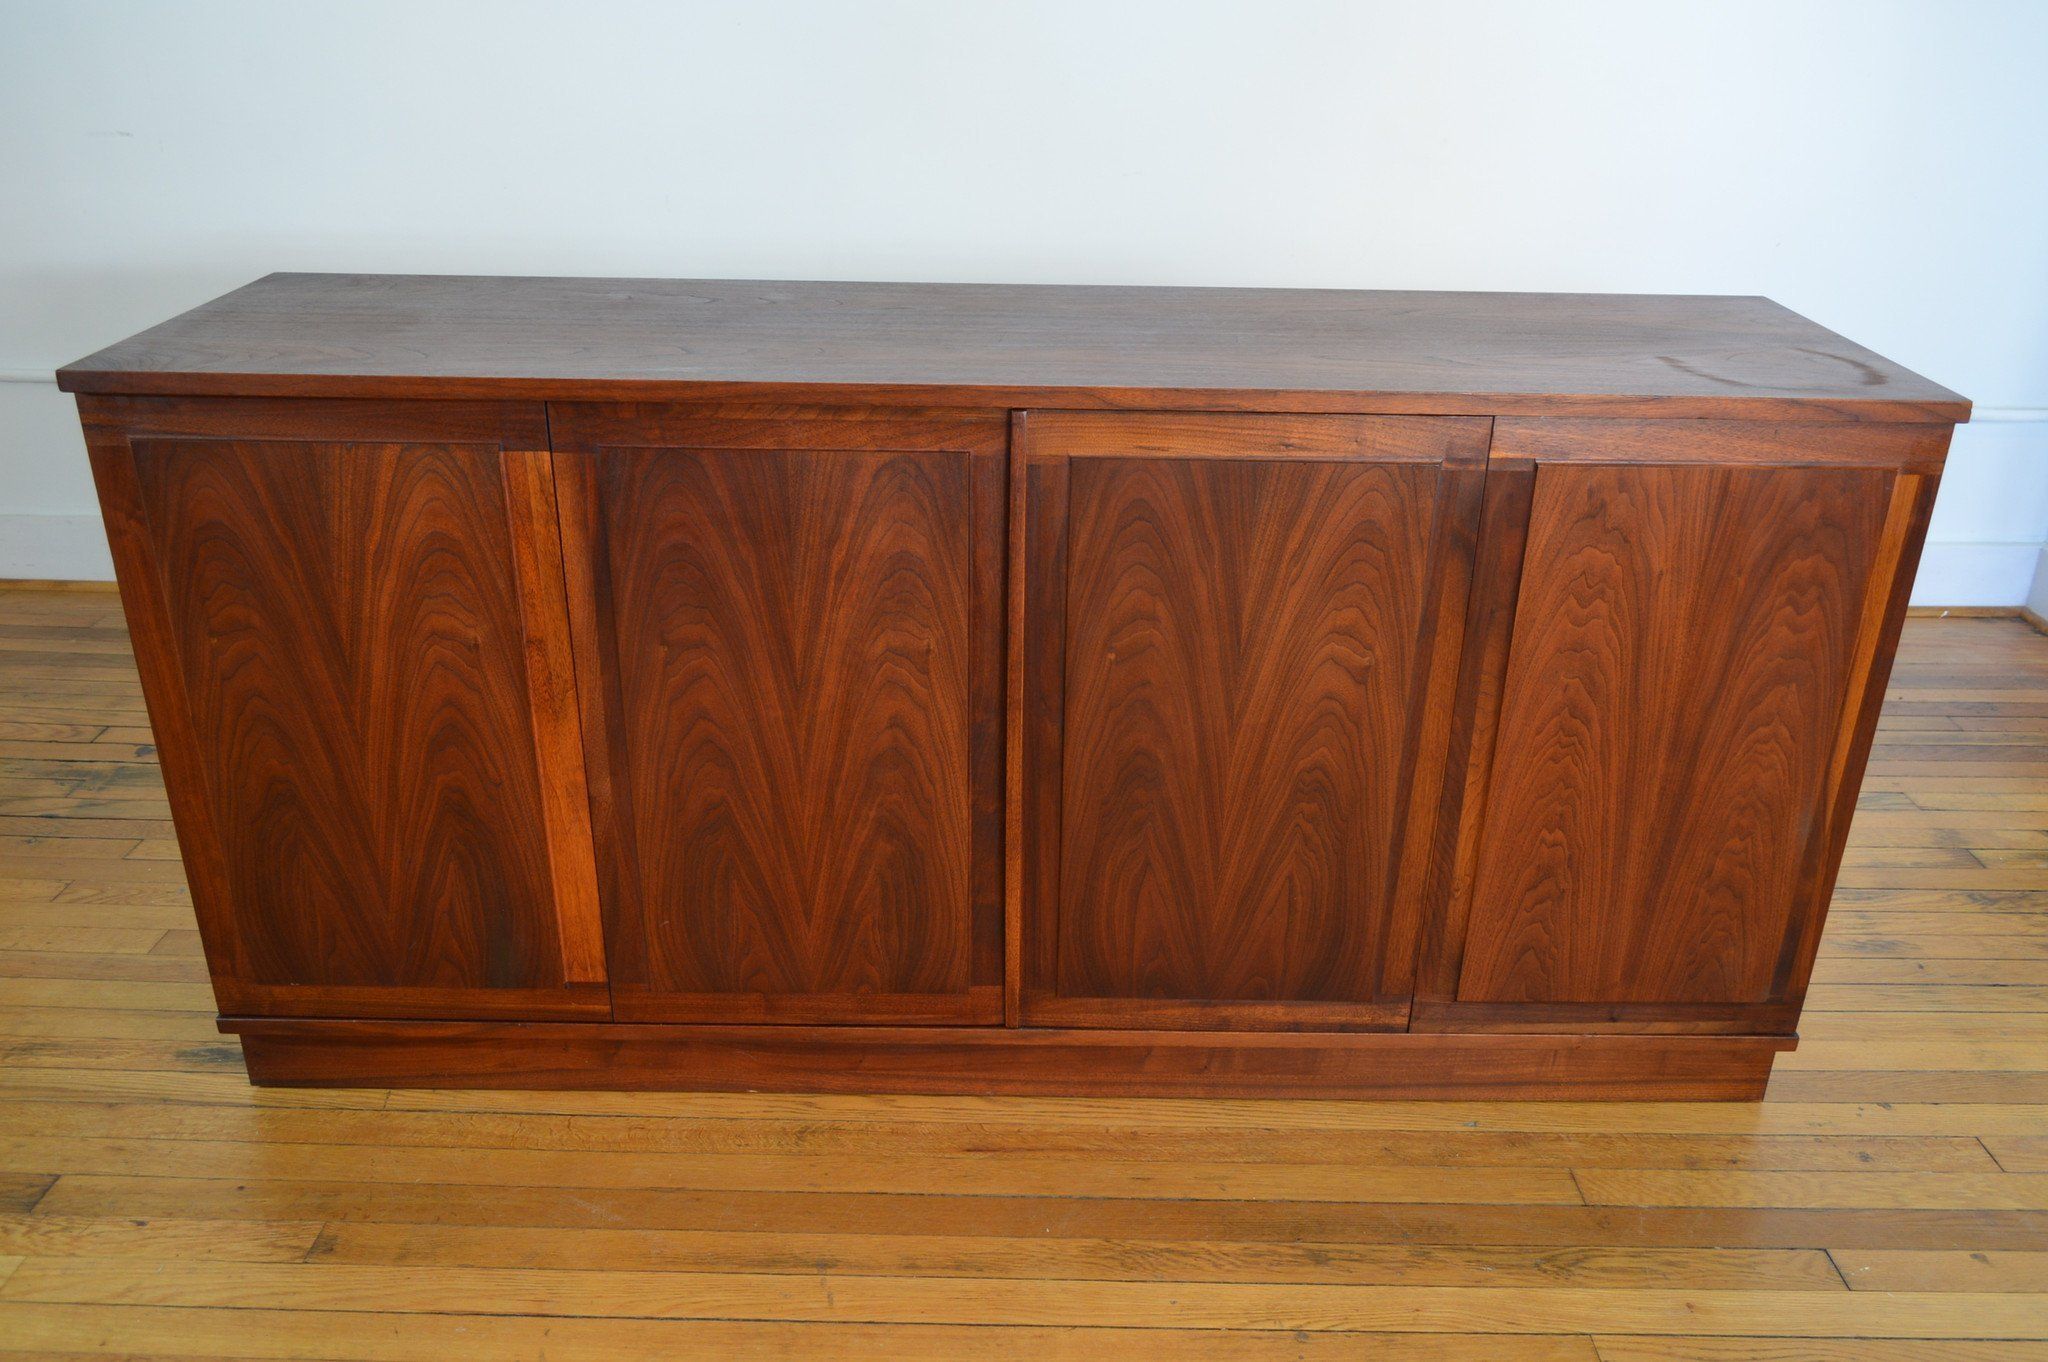 Admirable 12 Drawer Chest Wayfair Buffet Server White Pertaining To Most Current Seiling Sideboards (View 18 of 20)